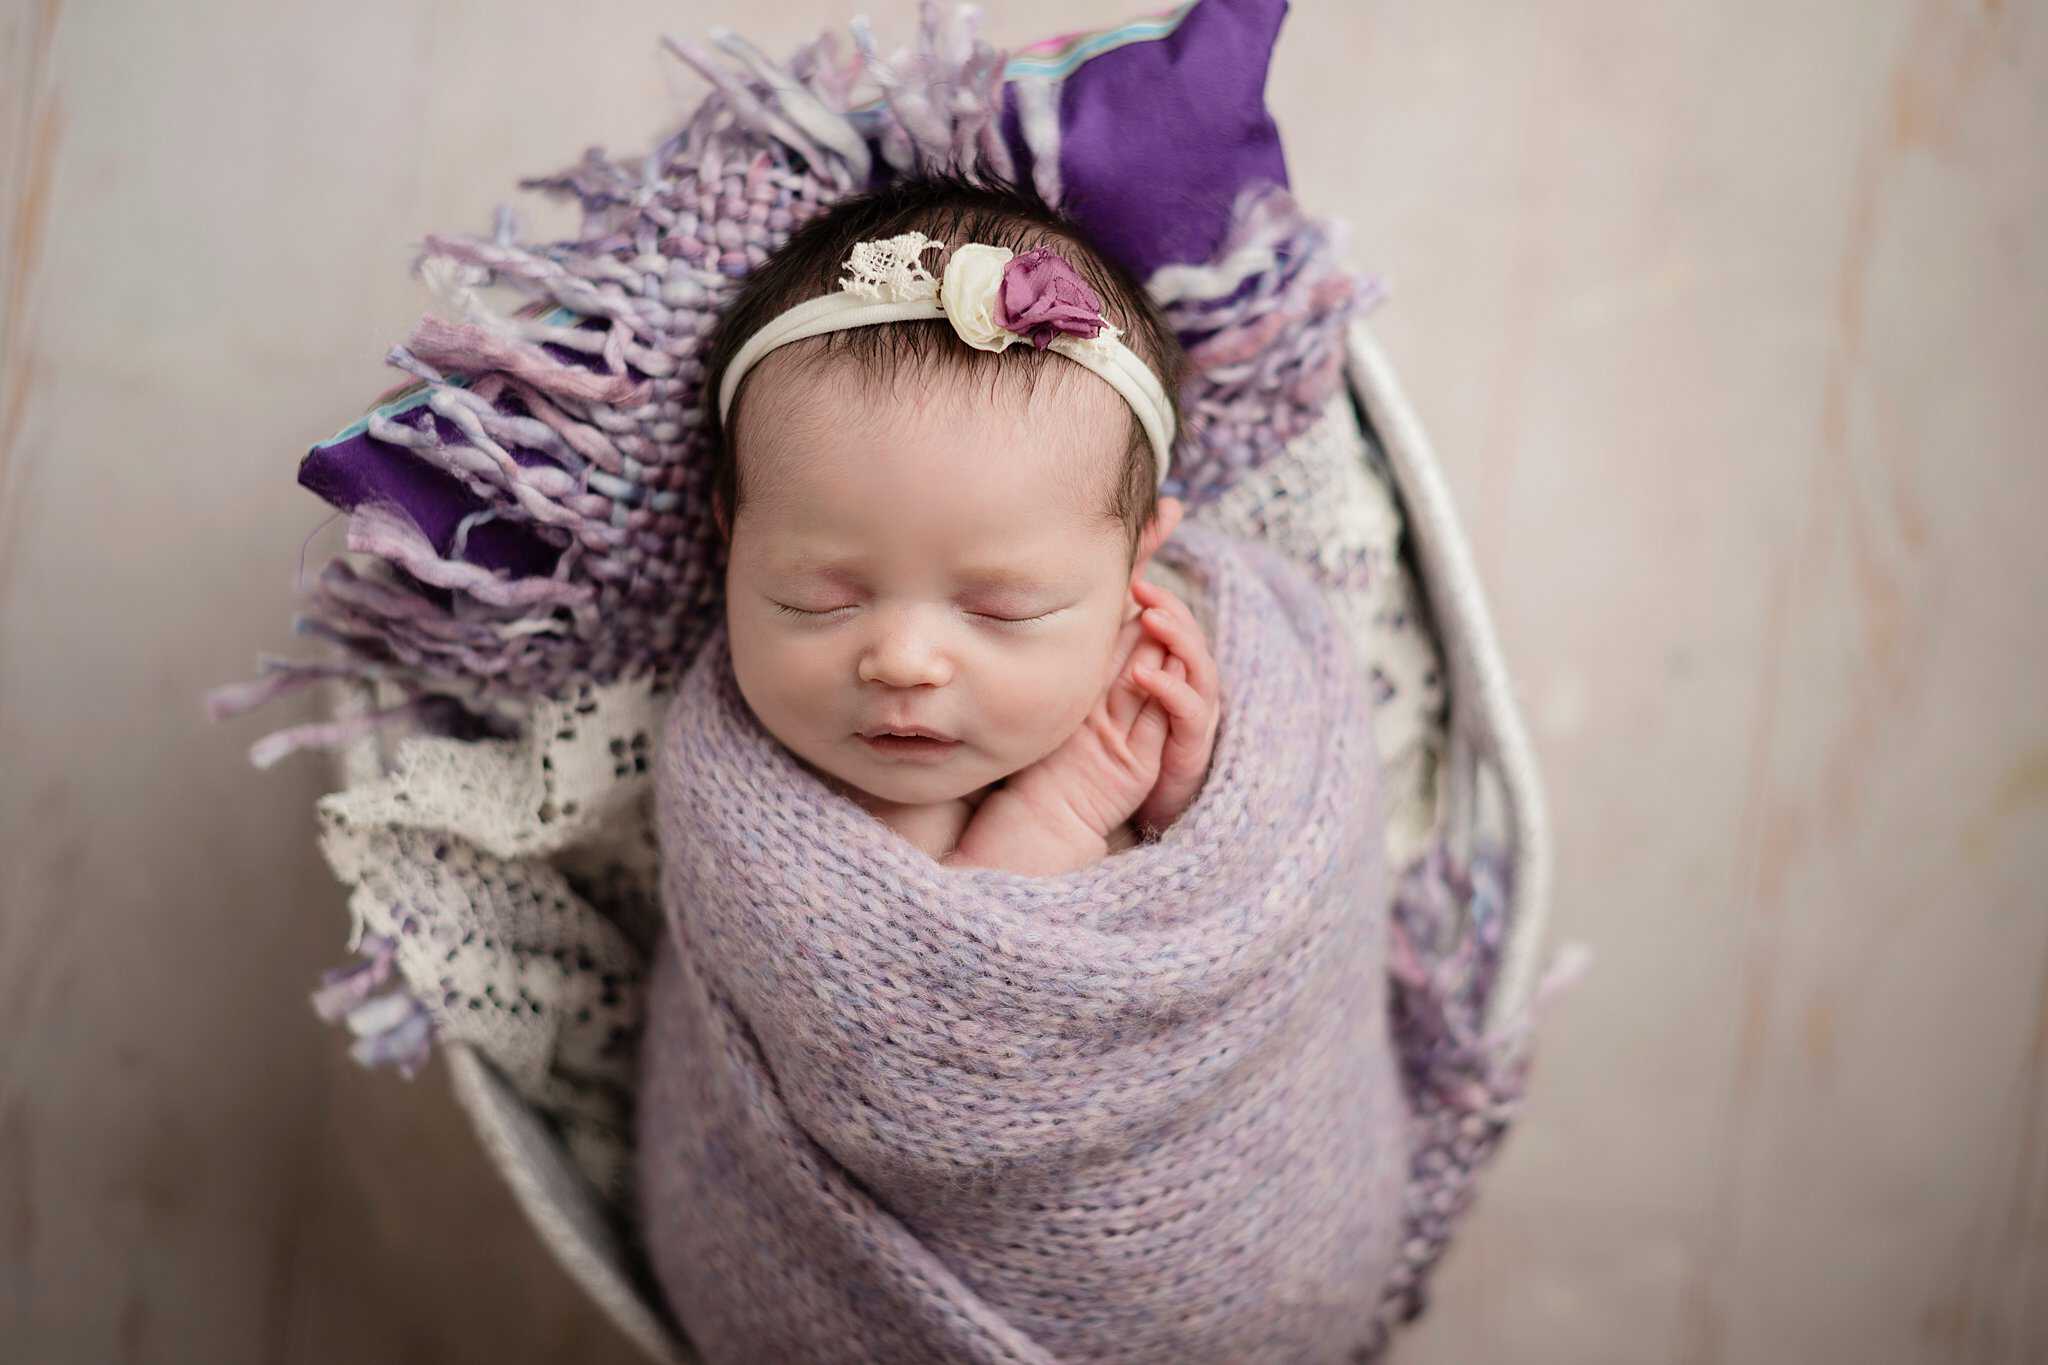 Baby wrapped in a purple swaddle in a basket with floral headband